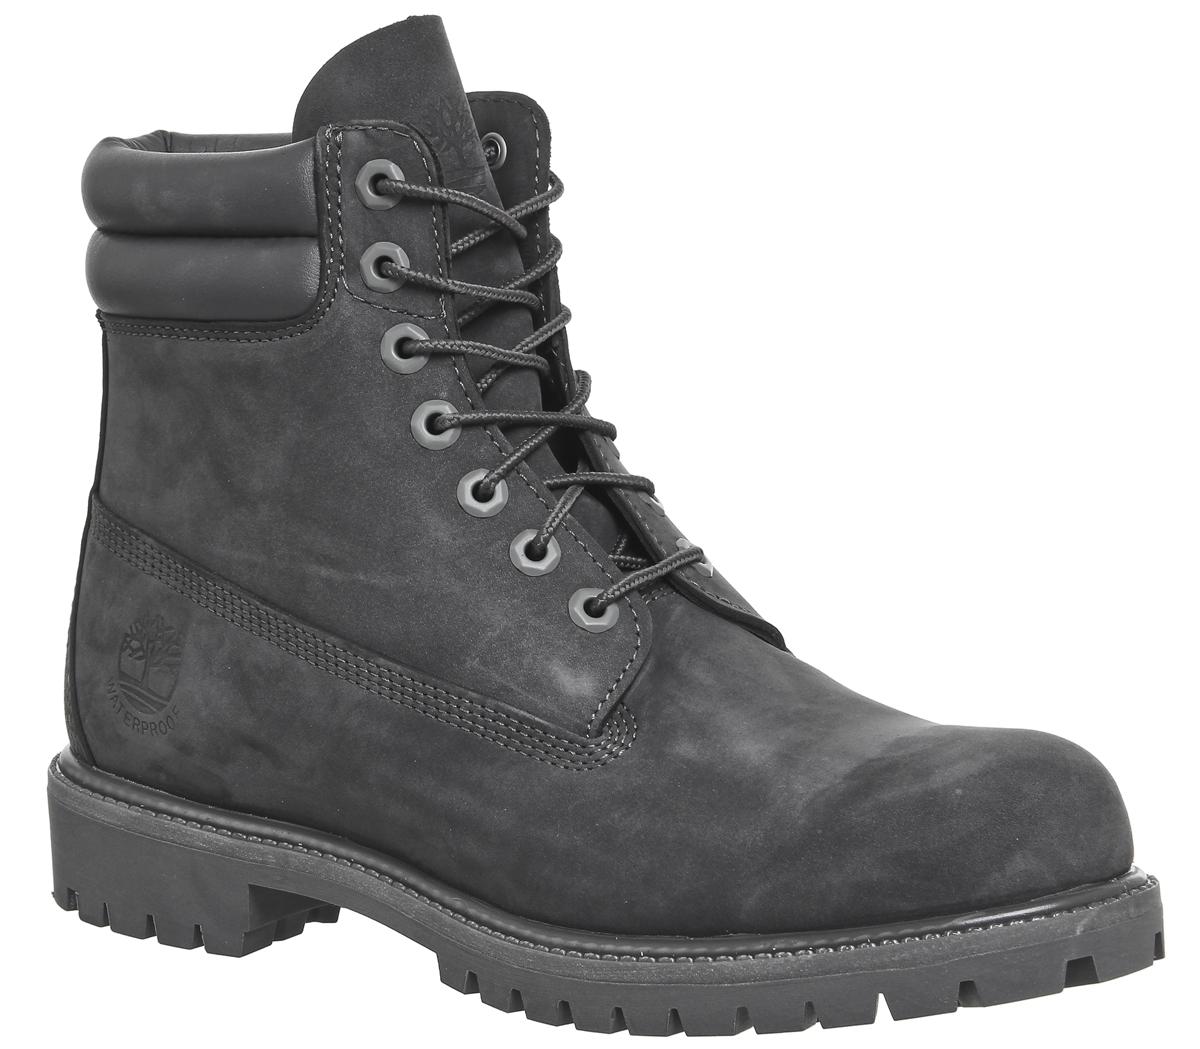 Timberland 6 Inch Double Collar Boots Dark Grey - Men’s Boots